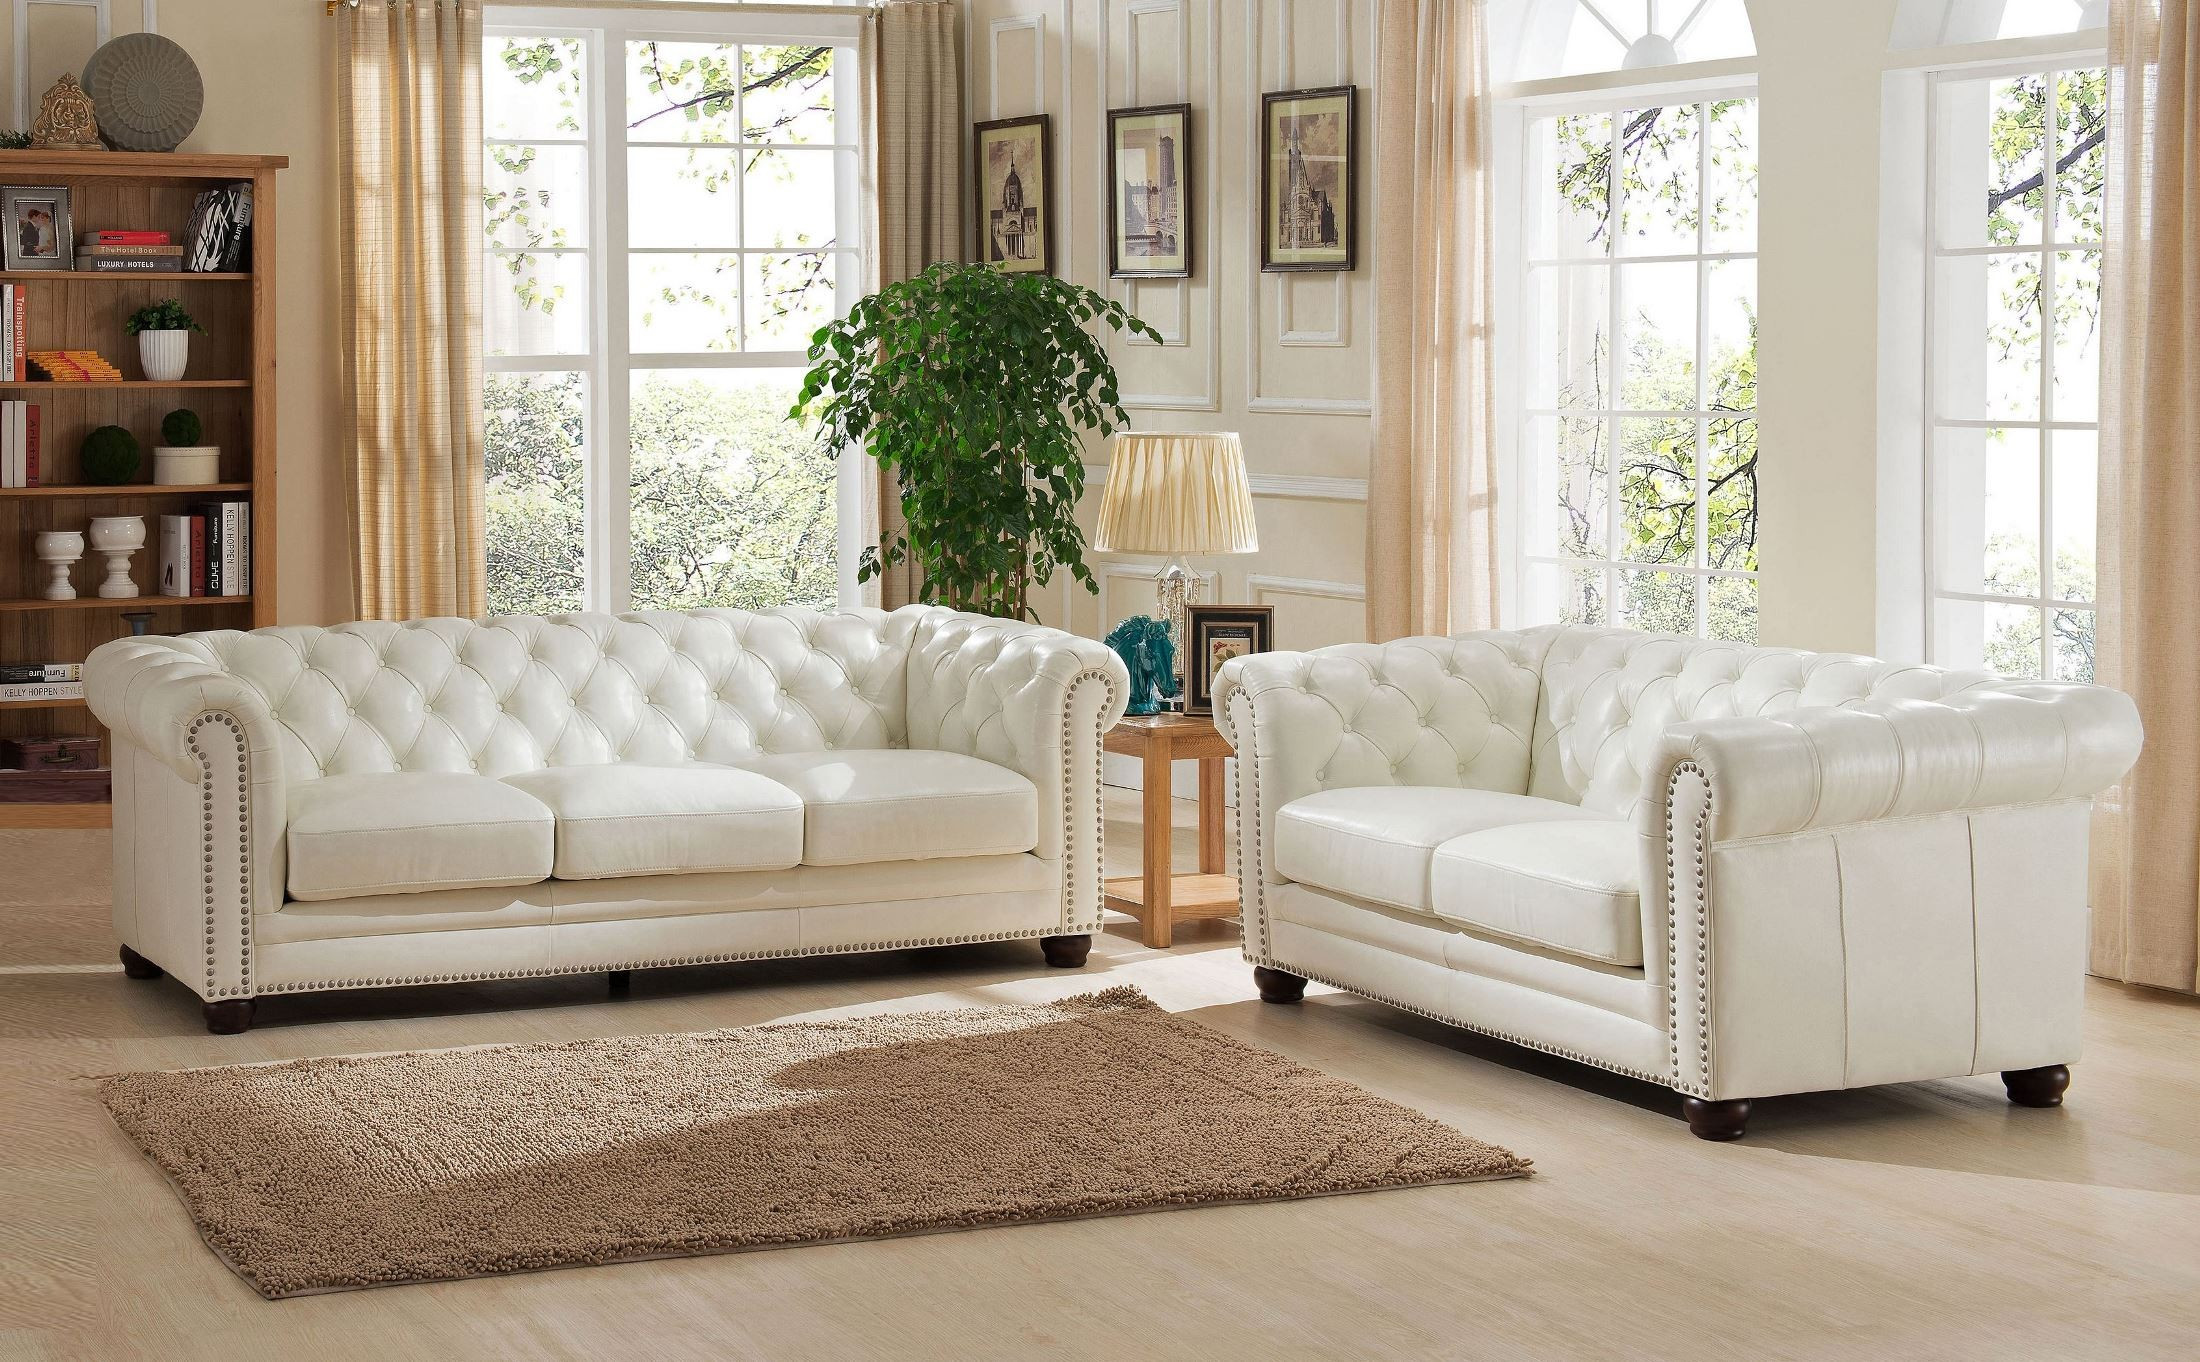 White Living Room Chair
 Monaco Pearl White Leather Living Room Set from Amax